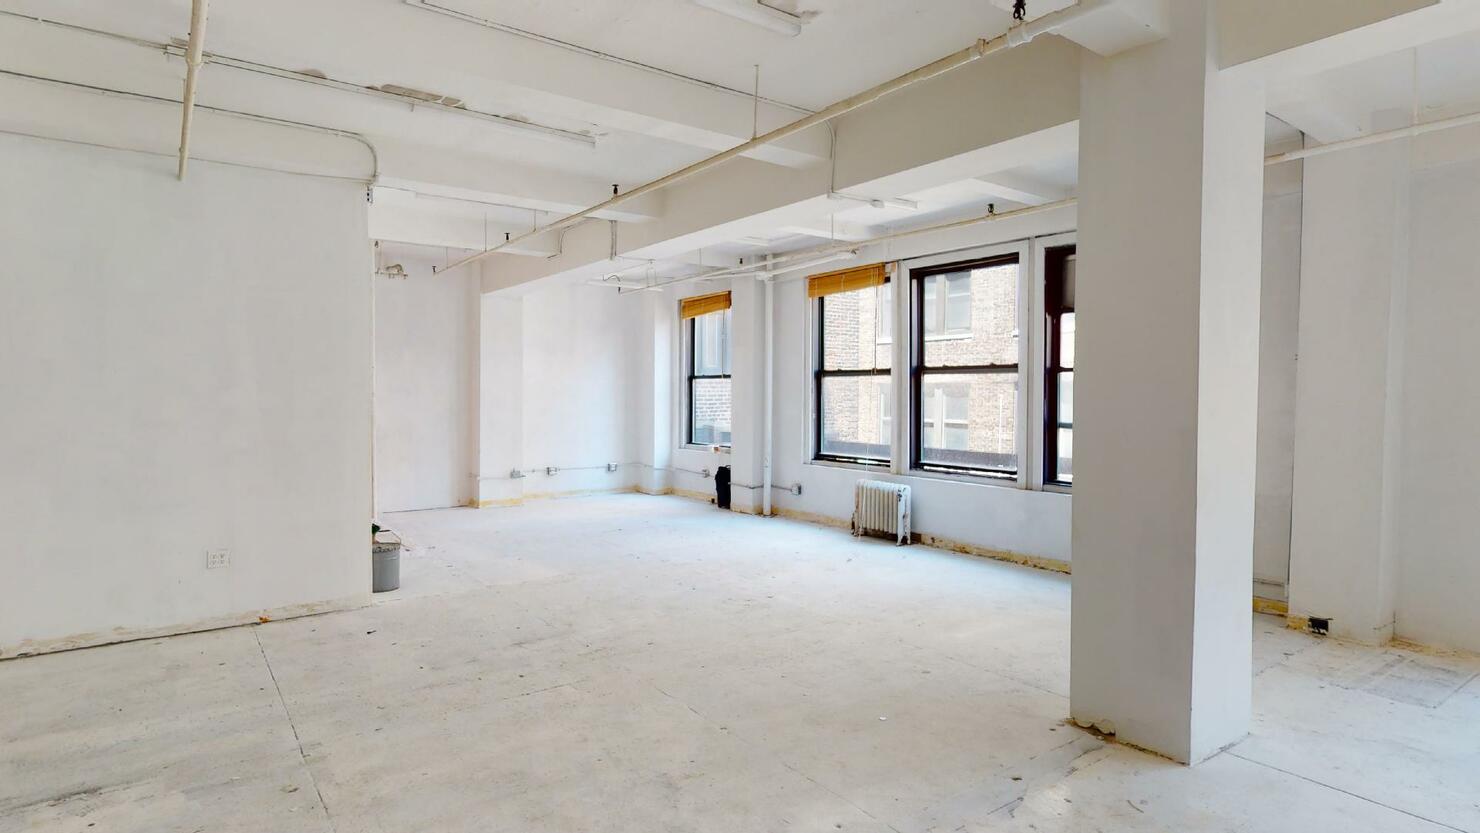 255 West 36th Street Office Space - White walls